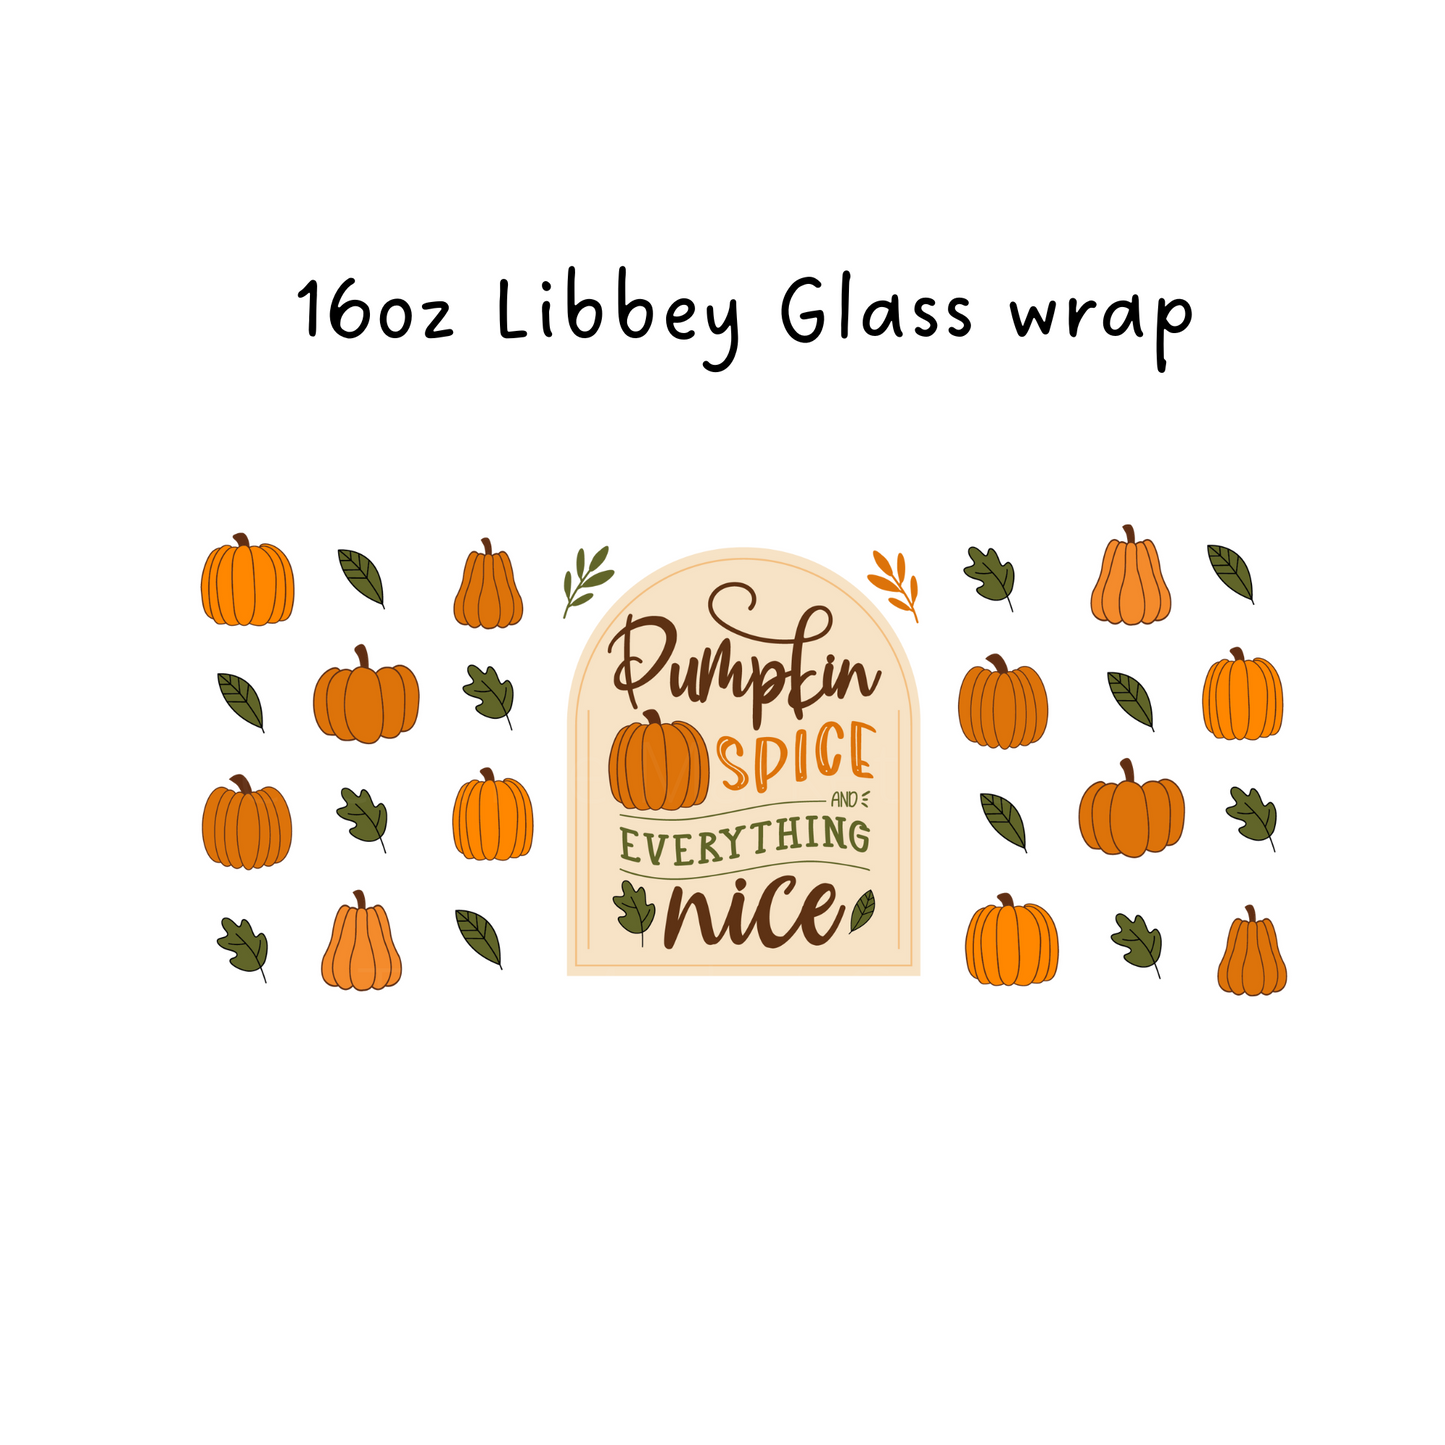 Pumpkin Spice Everything Nice 16 Oz Libbey Beer Glass Wrap